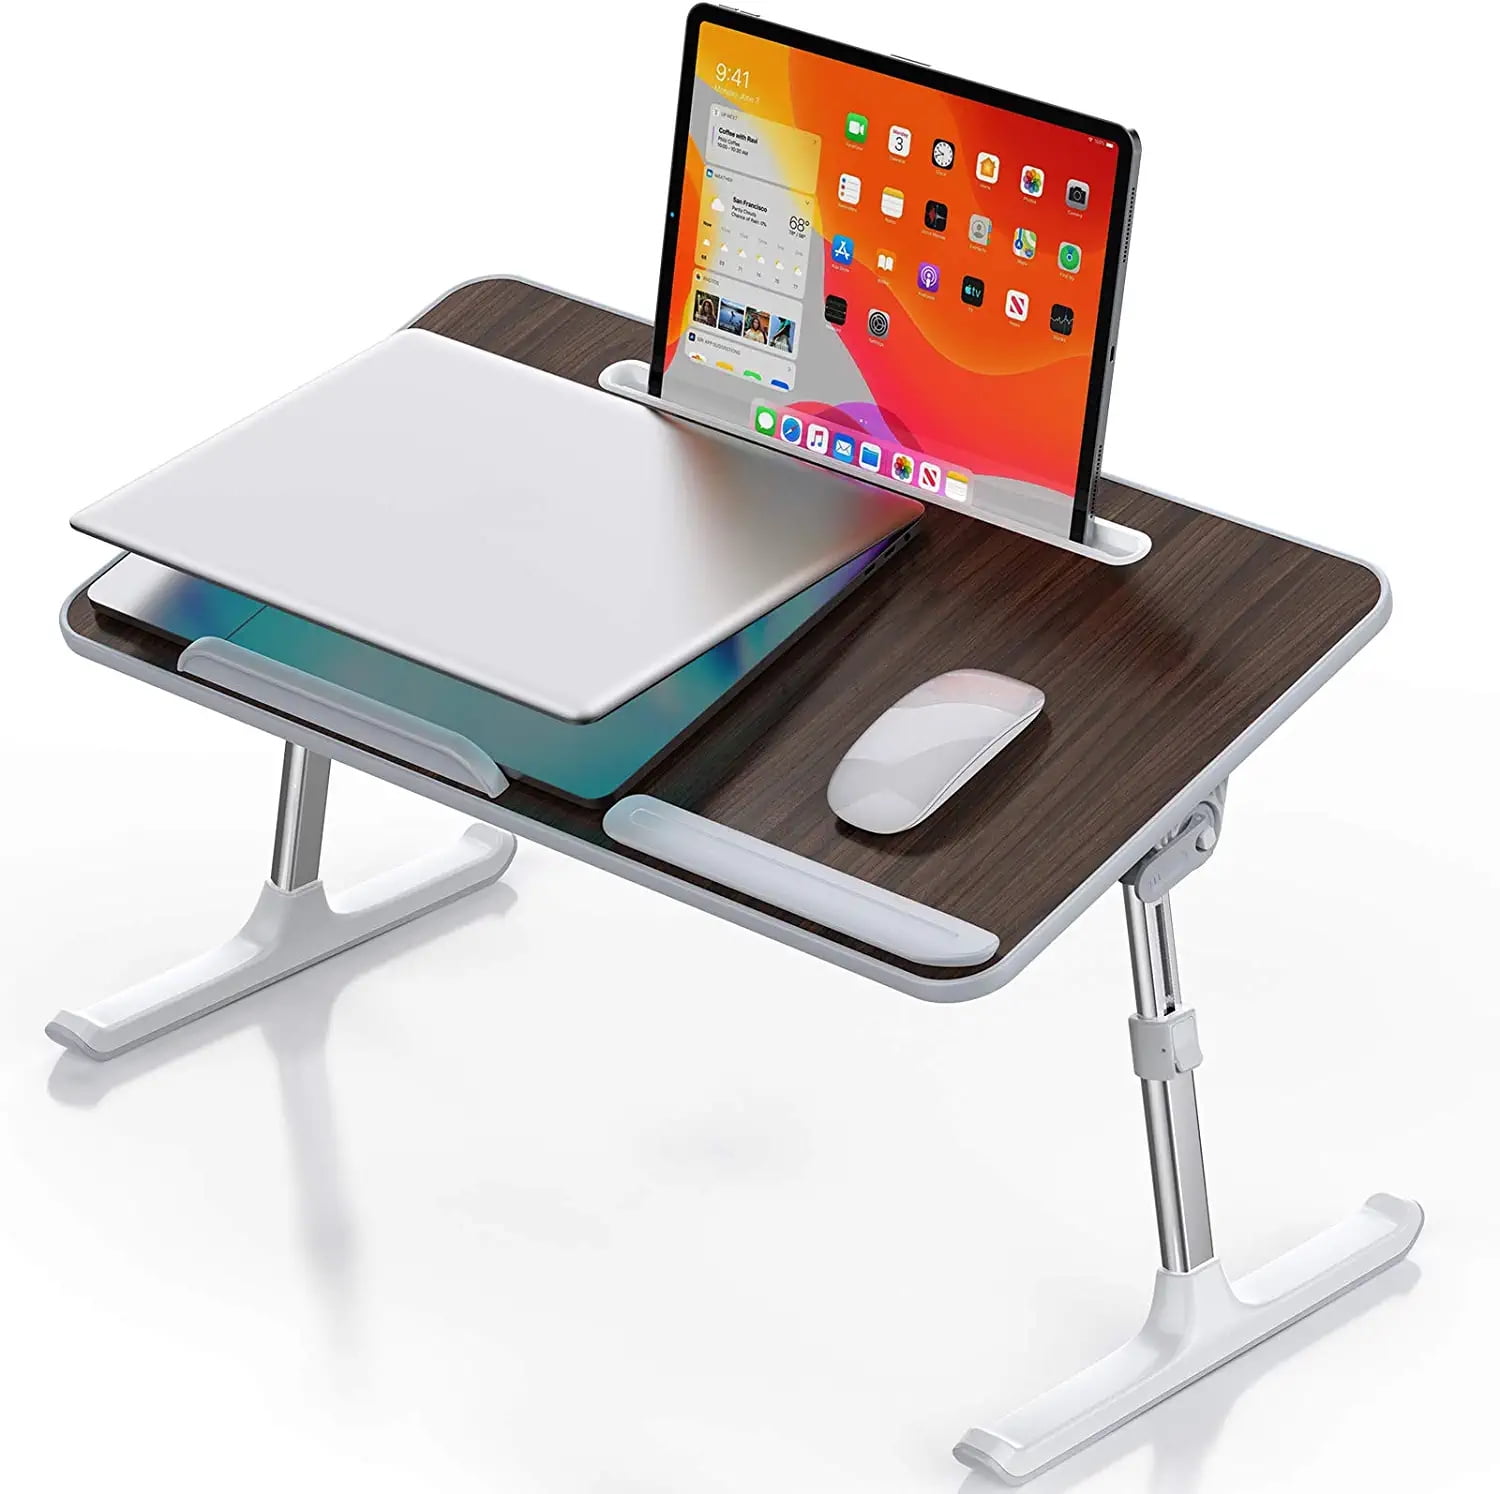 Laptop Lap Desk with Slot for Phone & Tablet Lap Desk w/Cup Holder Drawing Table for Floor & Bed LORYERGO Lap Desk for Laptop Suitable as Breakfast Tray Writing Desk Lap Table for Bed 